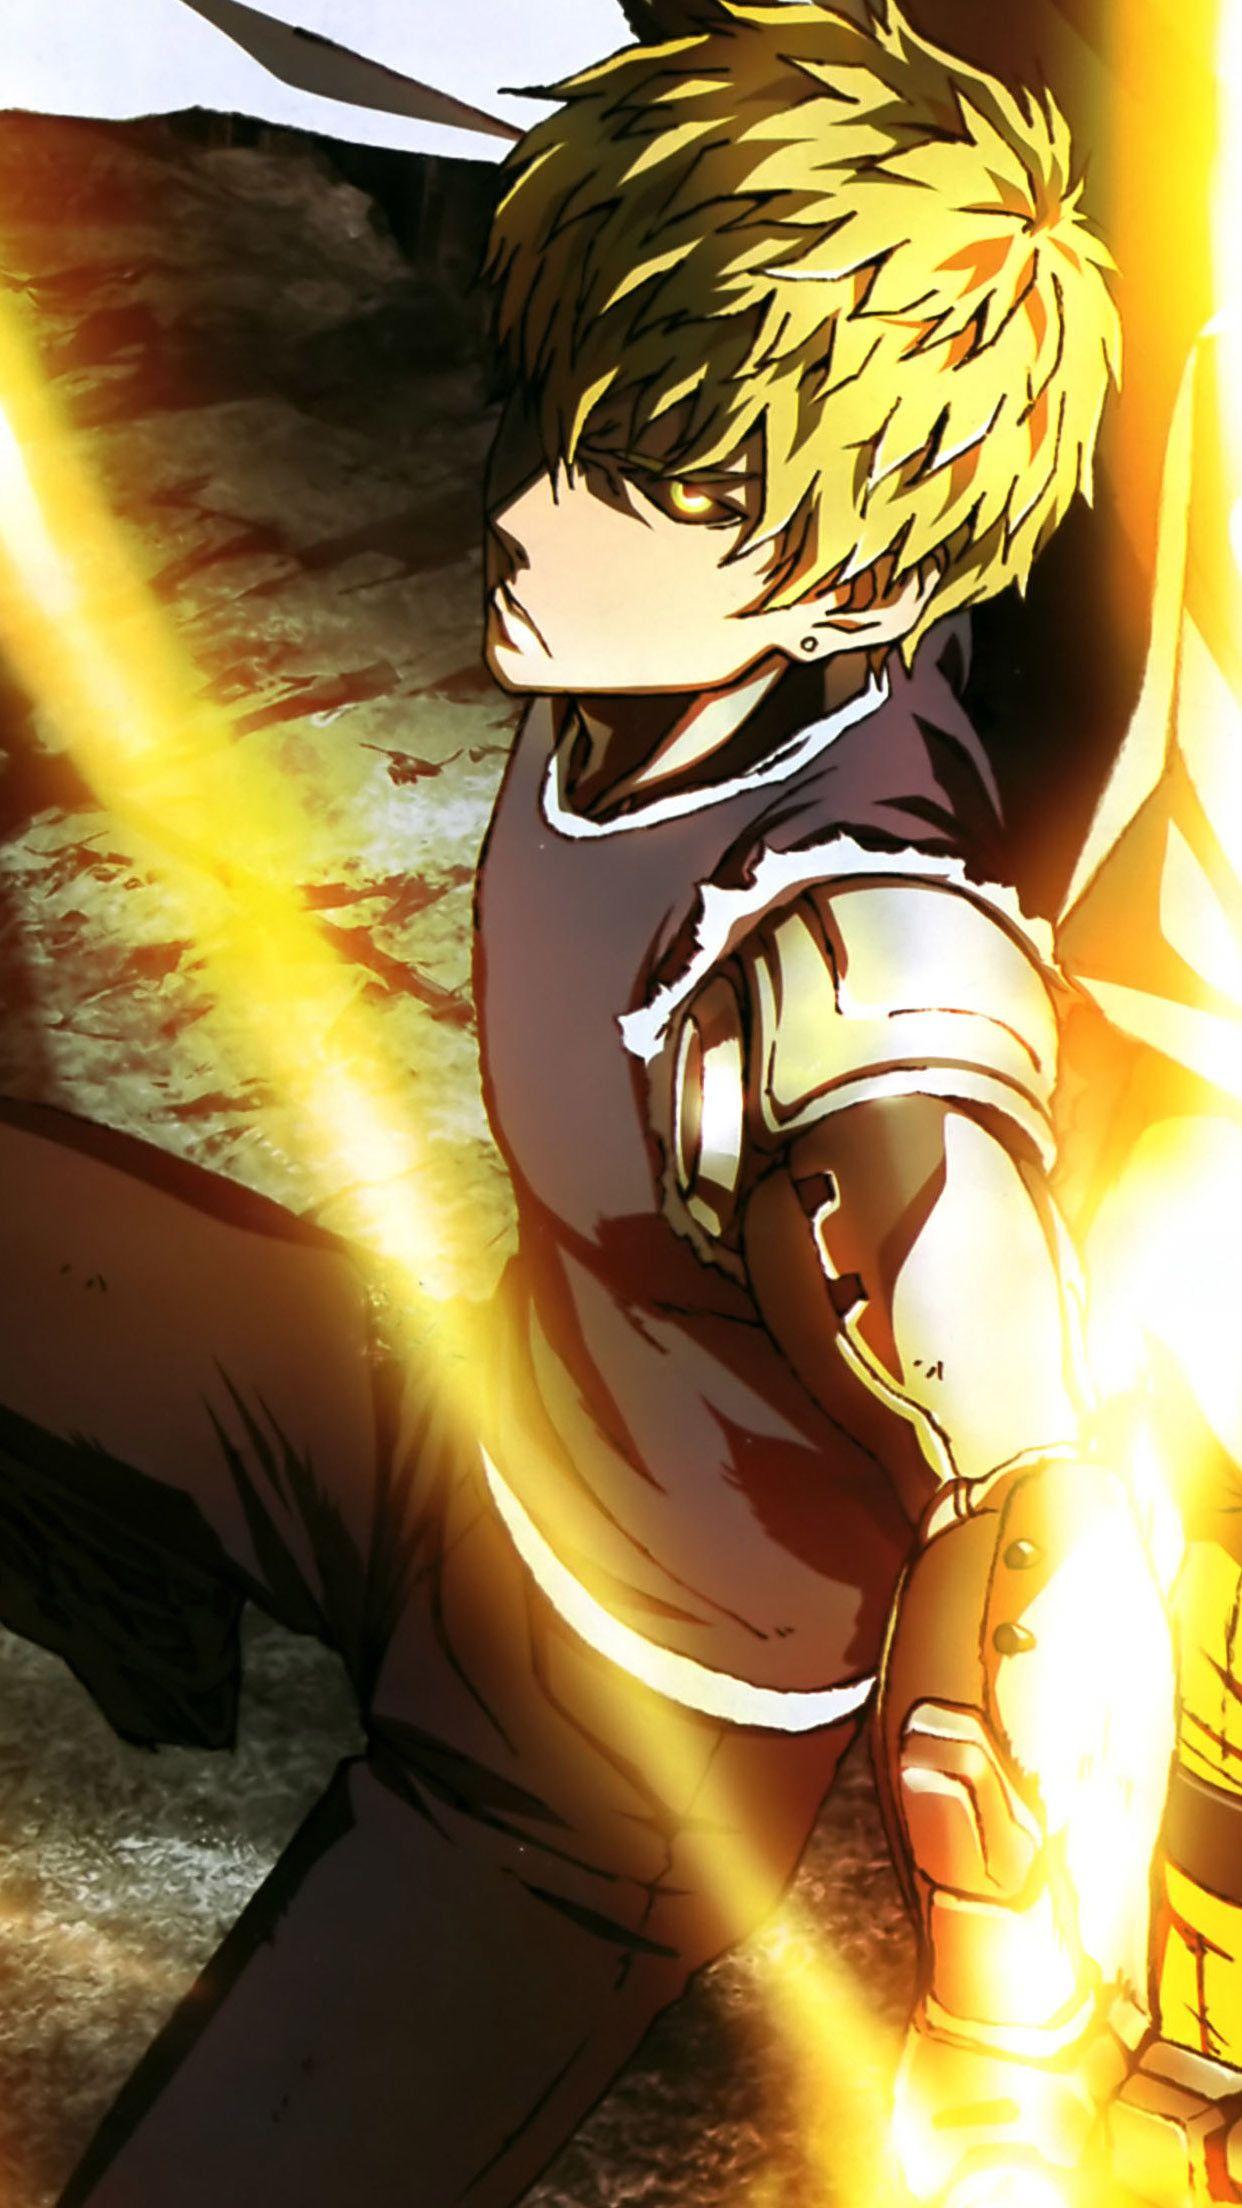 One punch man genos super iphone HD wallpaper background. One punch man anime, One punch man manga, One punch man